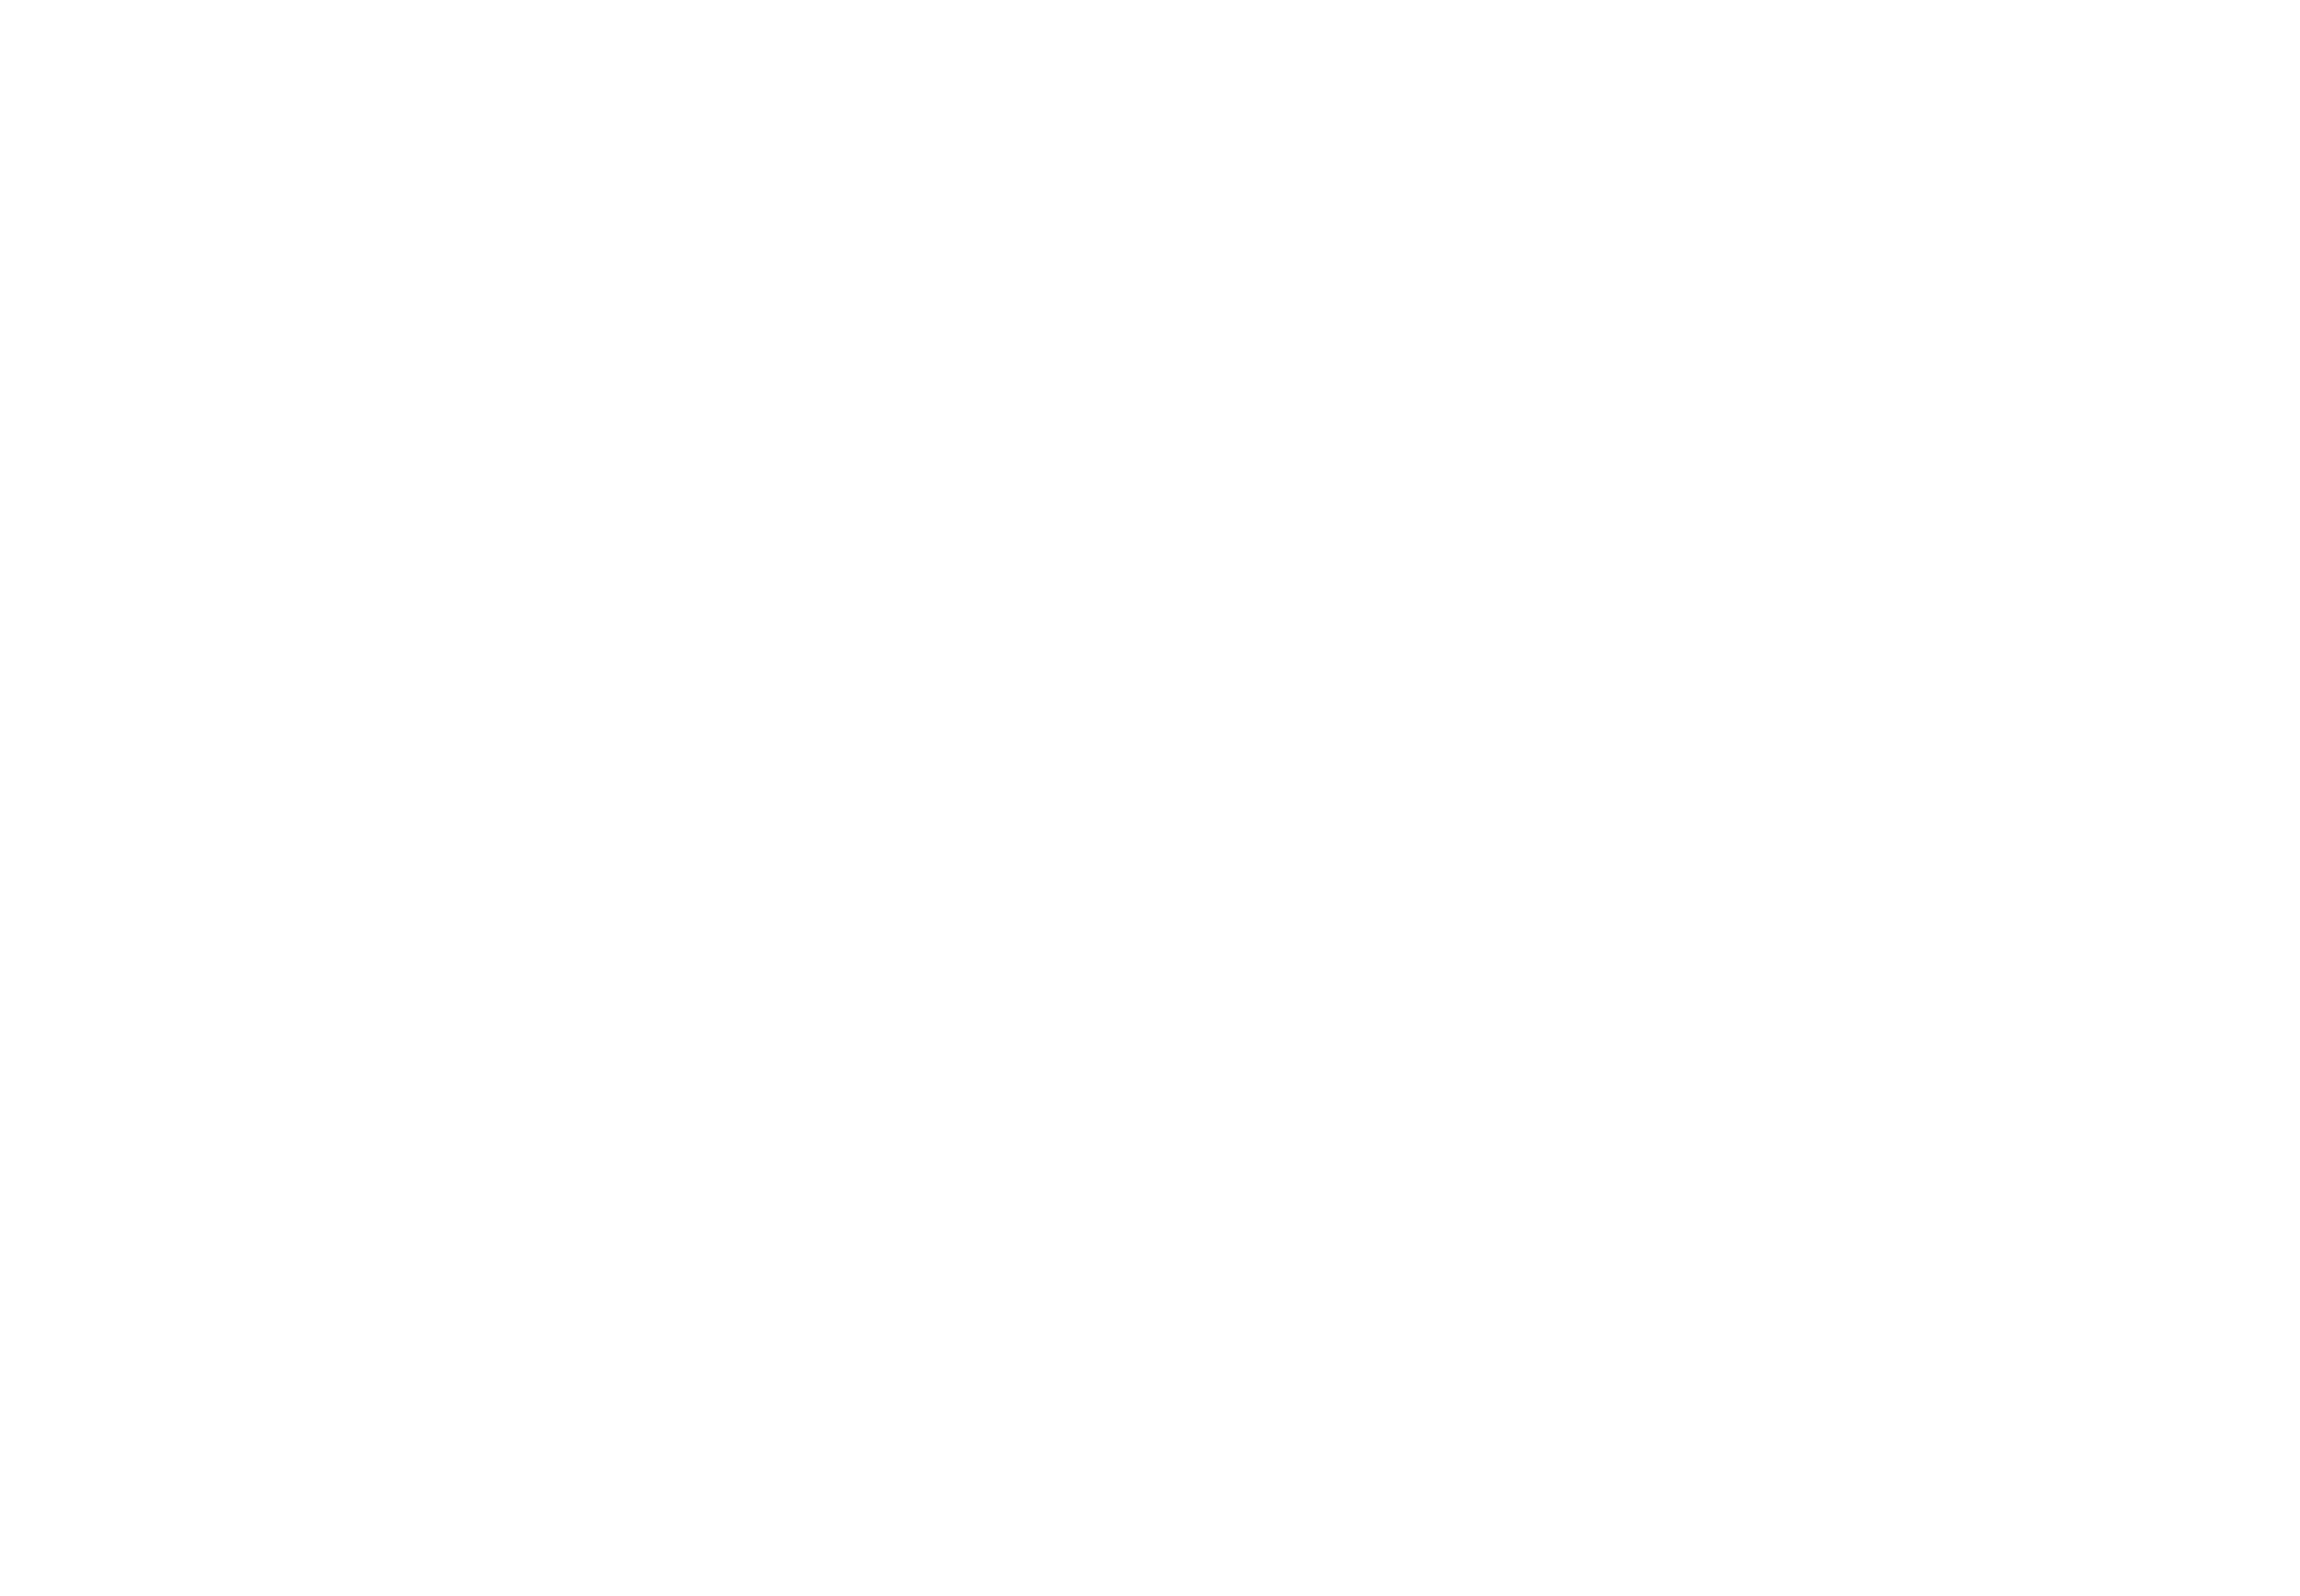 TheLaff_White-Vertical-Logo.png